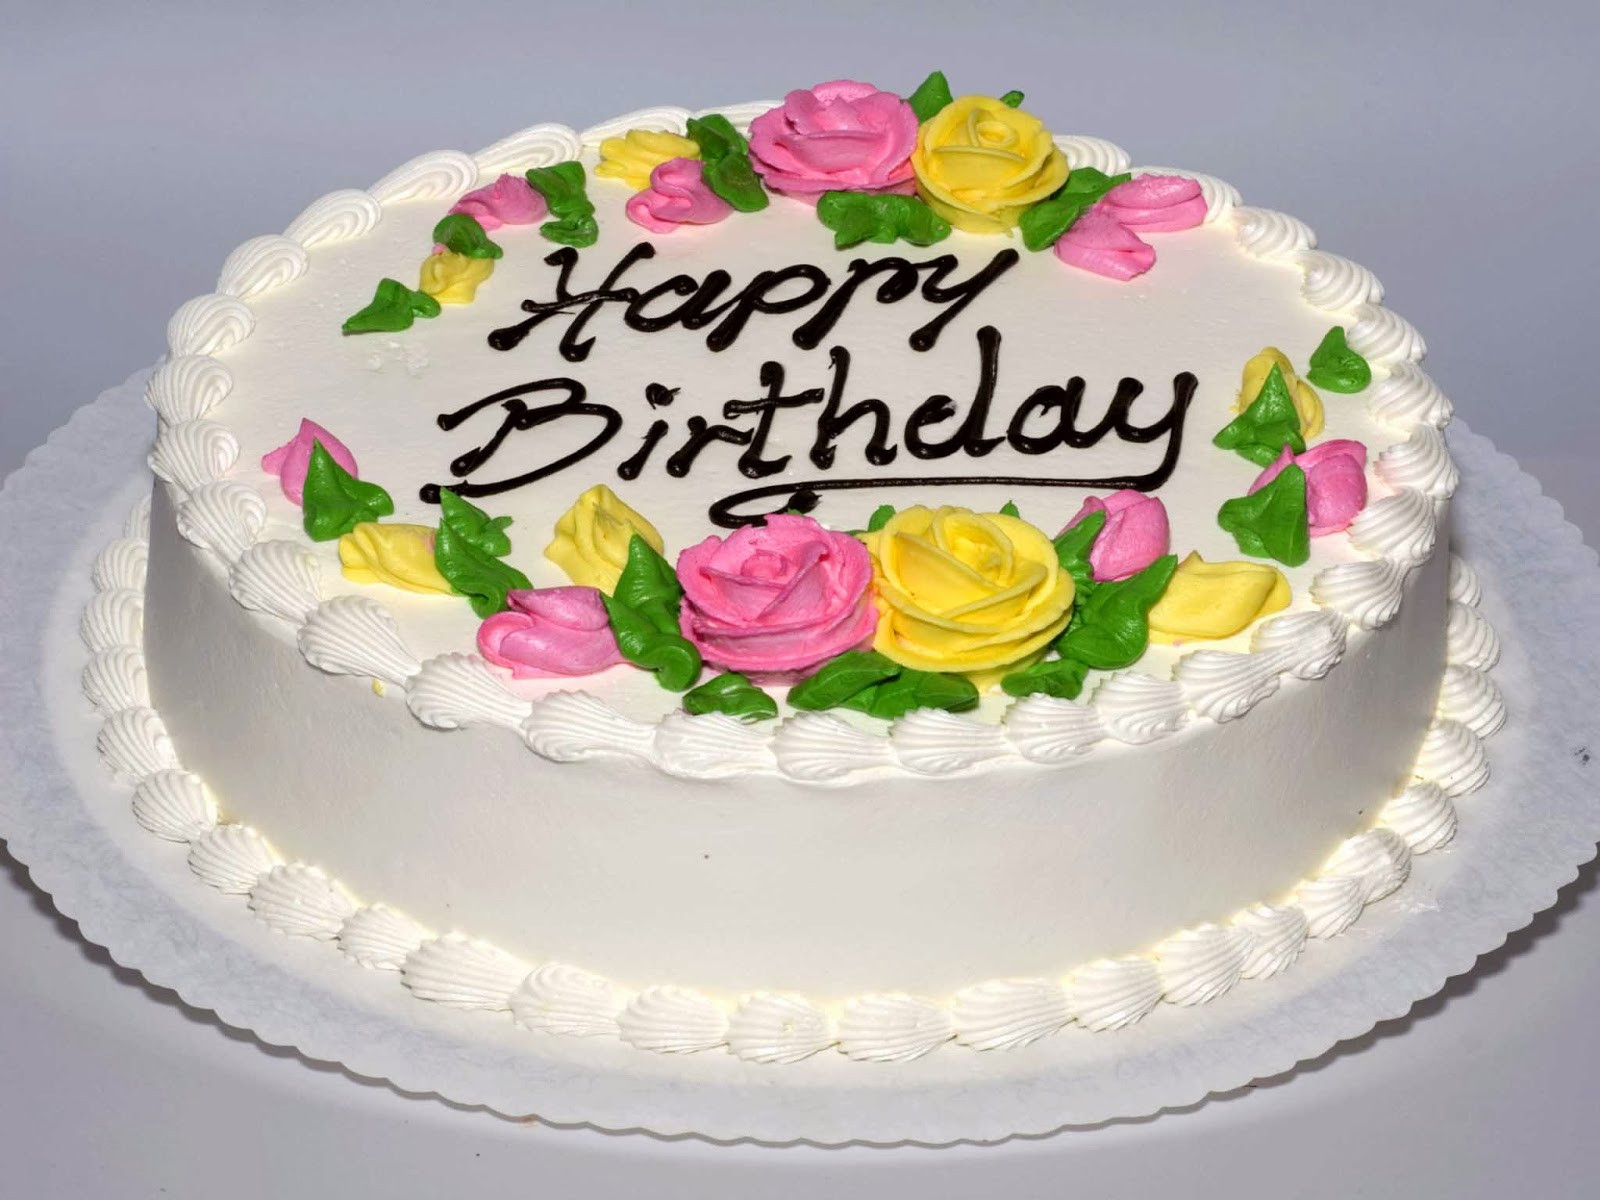 Happy Birthday Cake Images Free Download
 Lovable Happy Birthday Greetings free